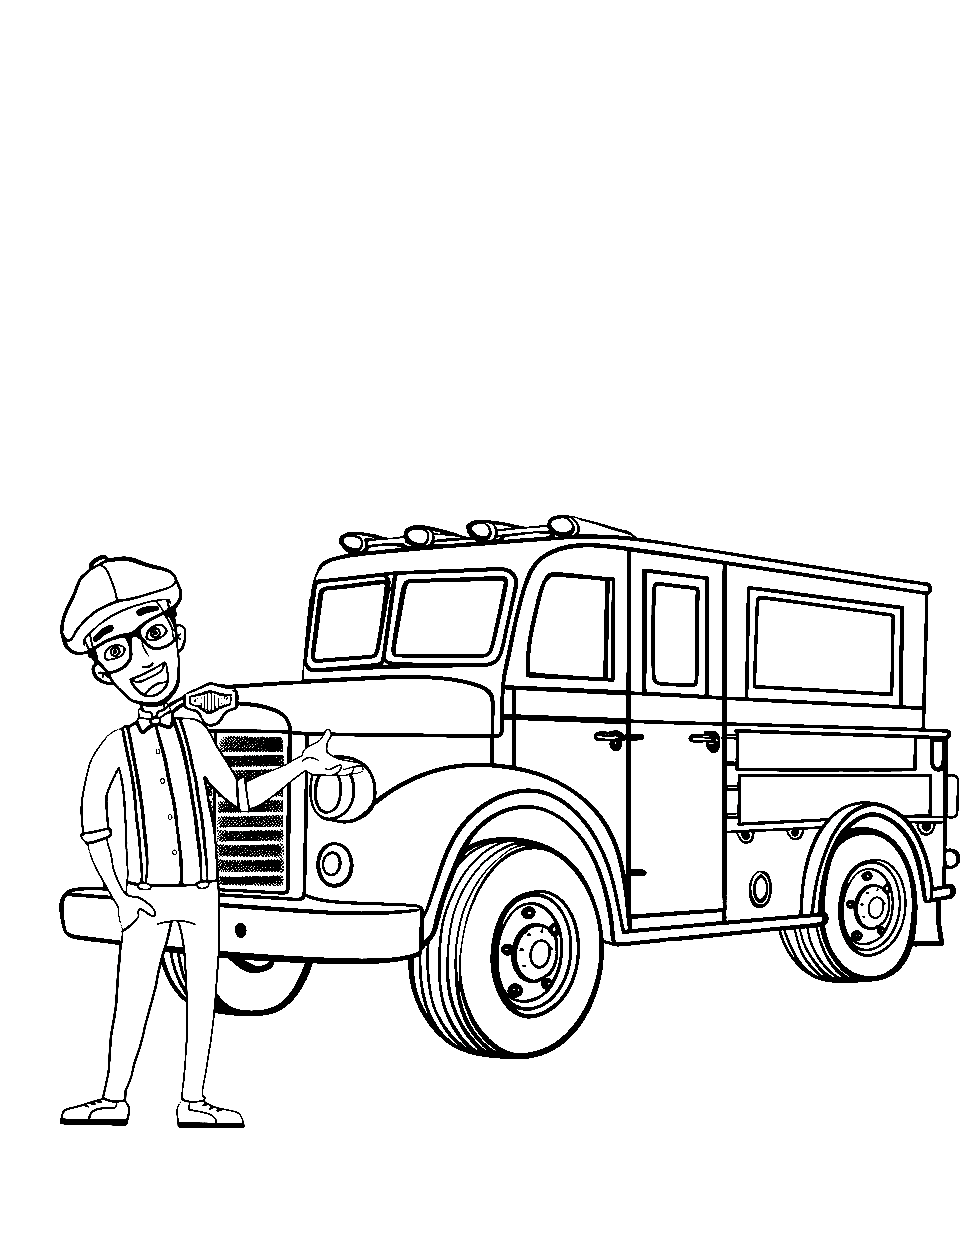 Blippi Explores a Fire Truck Coloring Page - The character Blippi standing next to a colorful fire truck.